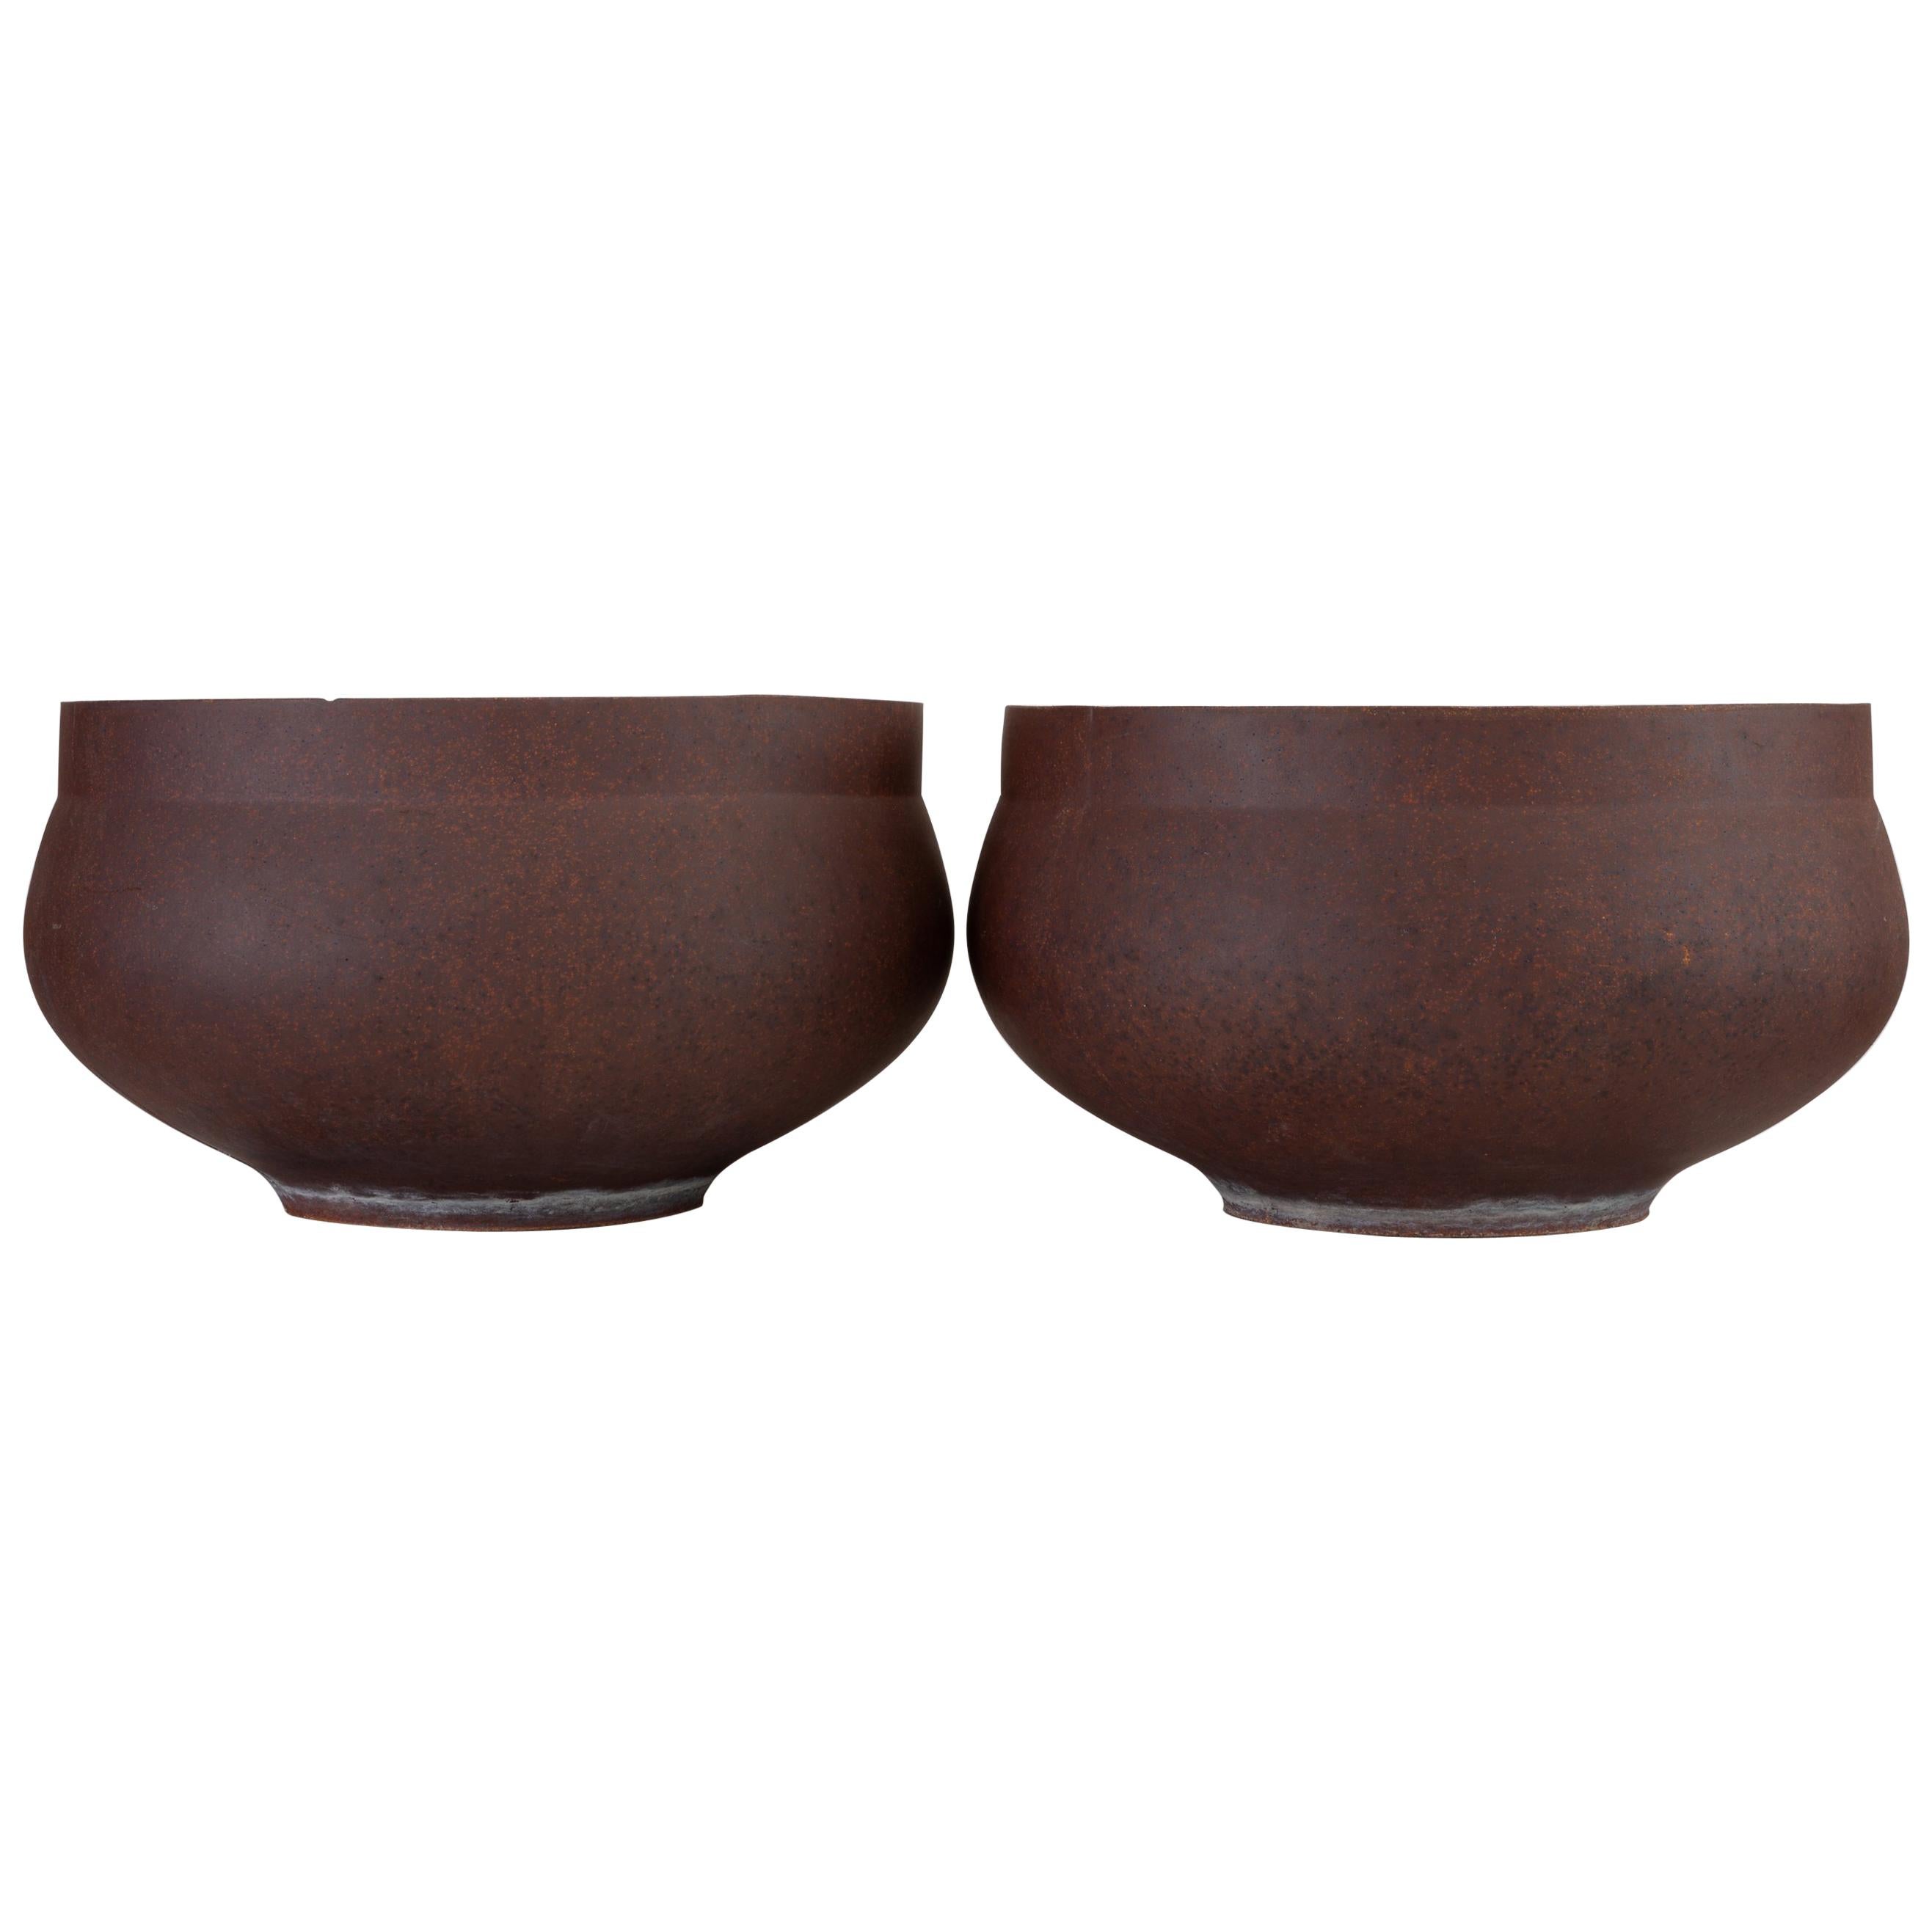 Pair of David Cressey Pro/Artisan Bowl Planters for Architectural Pottery